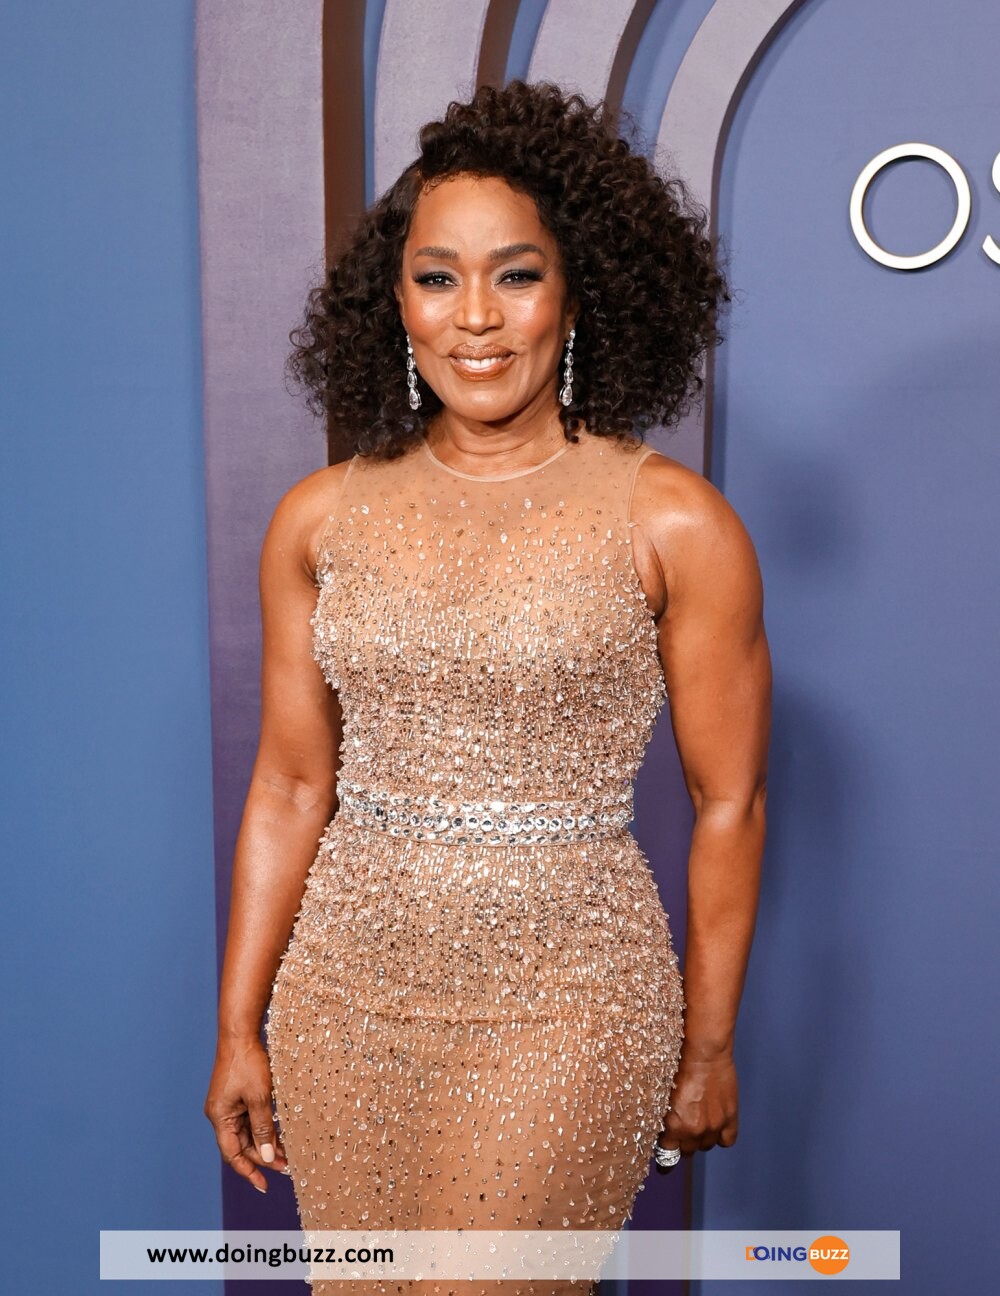 Angela Bassett Pays Tribute To Black Actresses In Honorary Oscar Speech 2